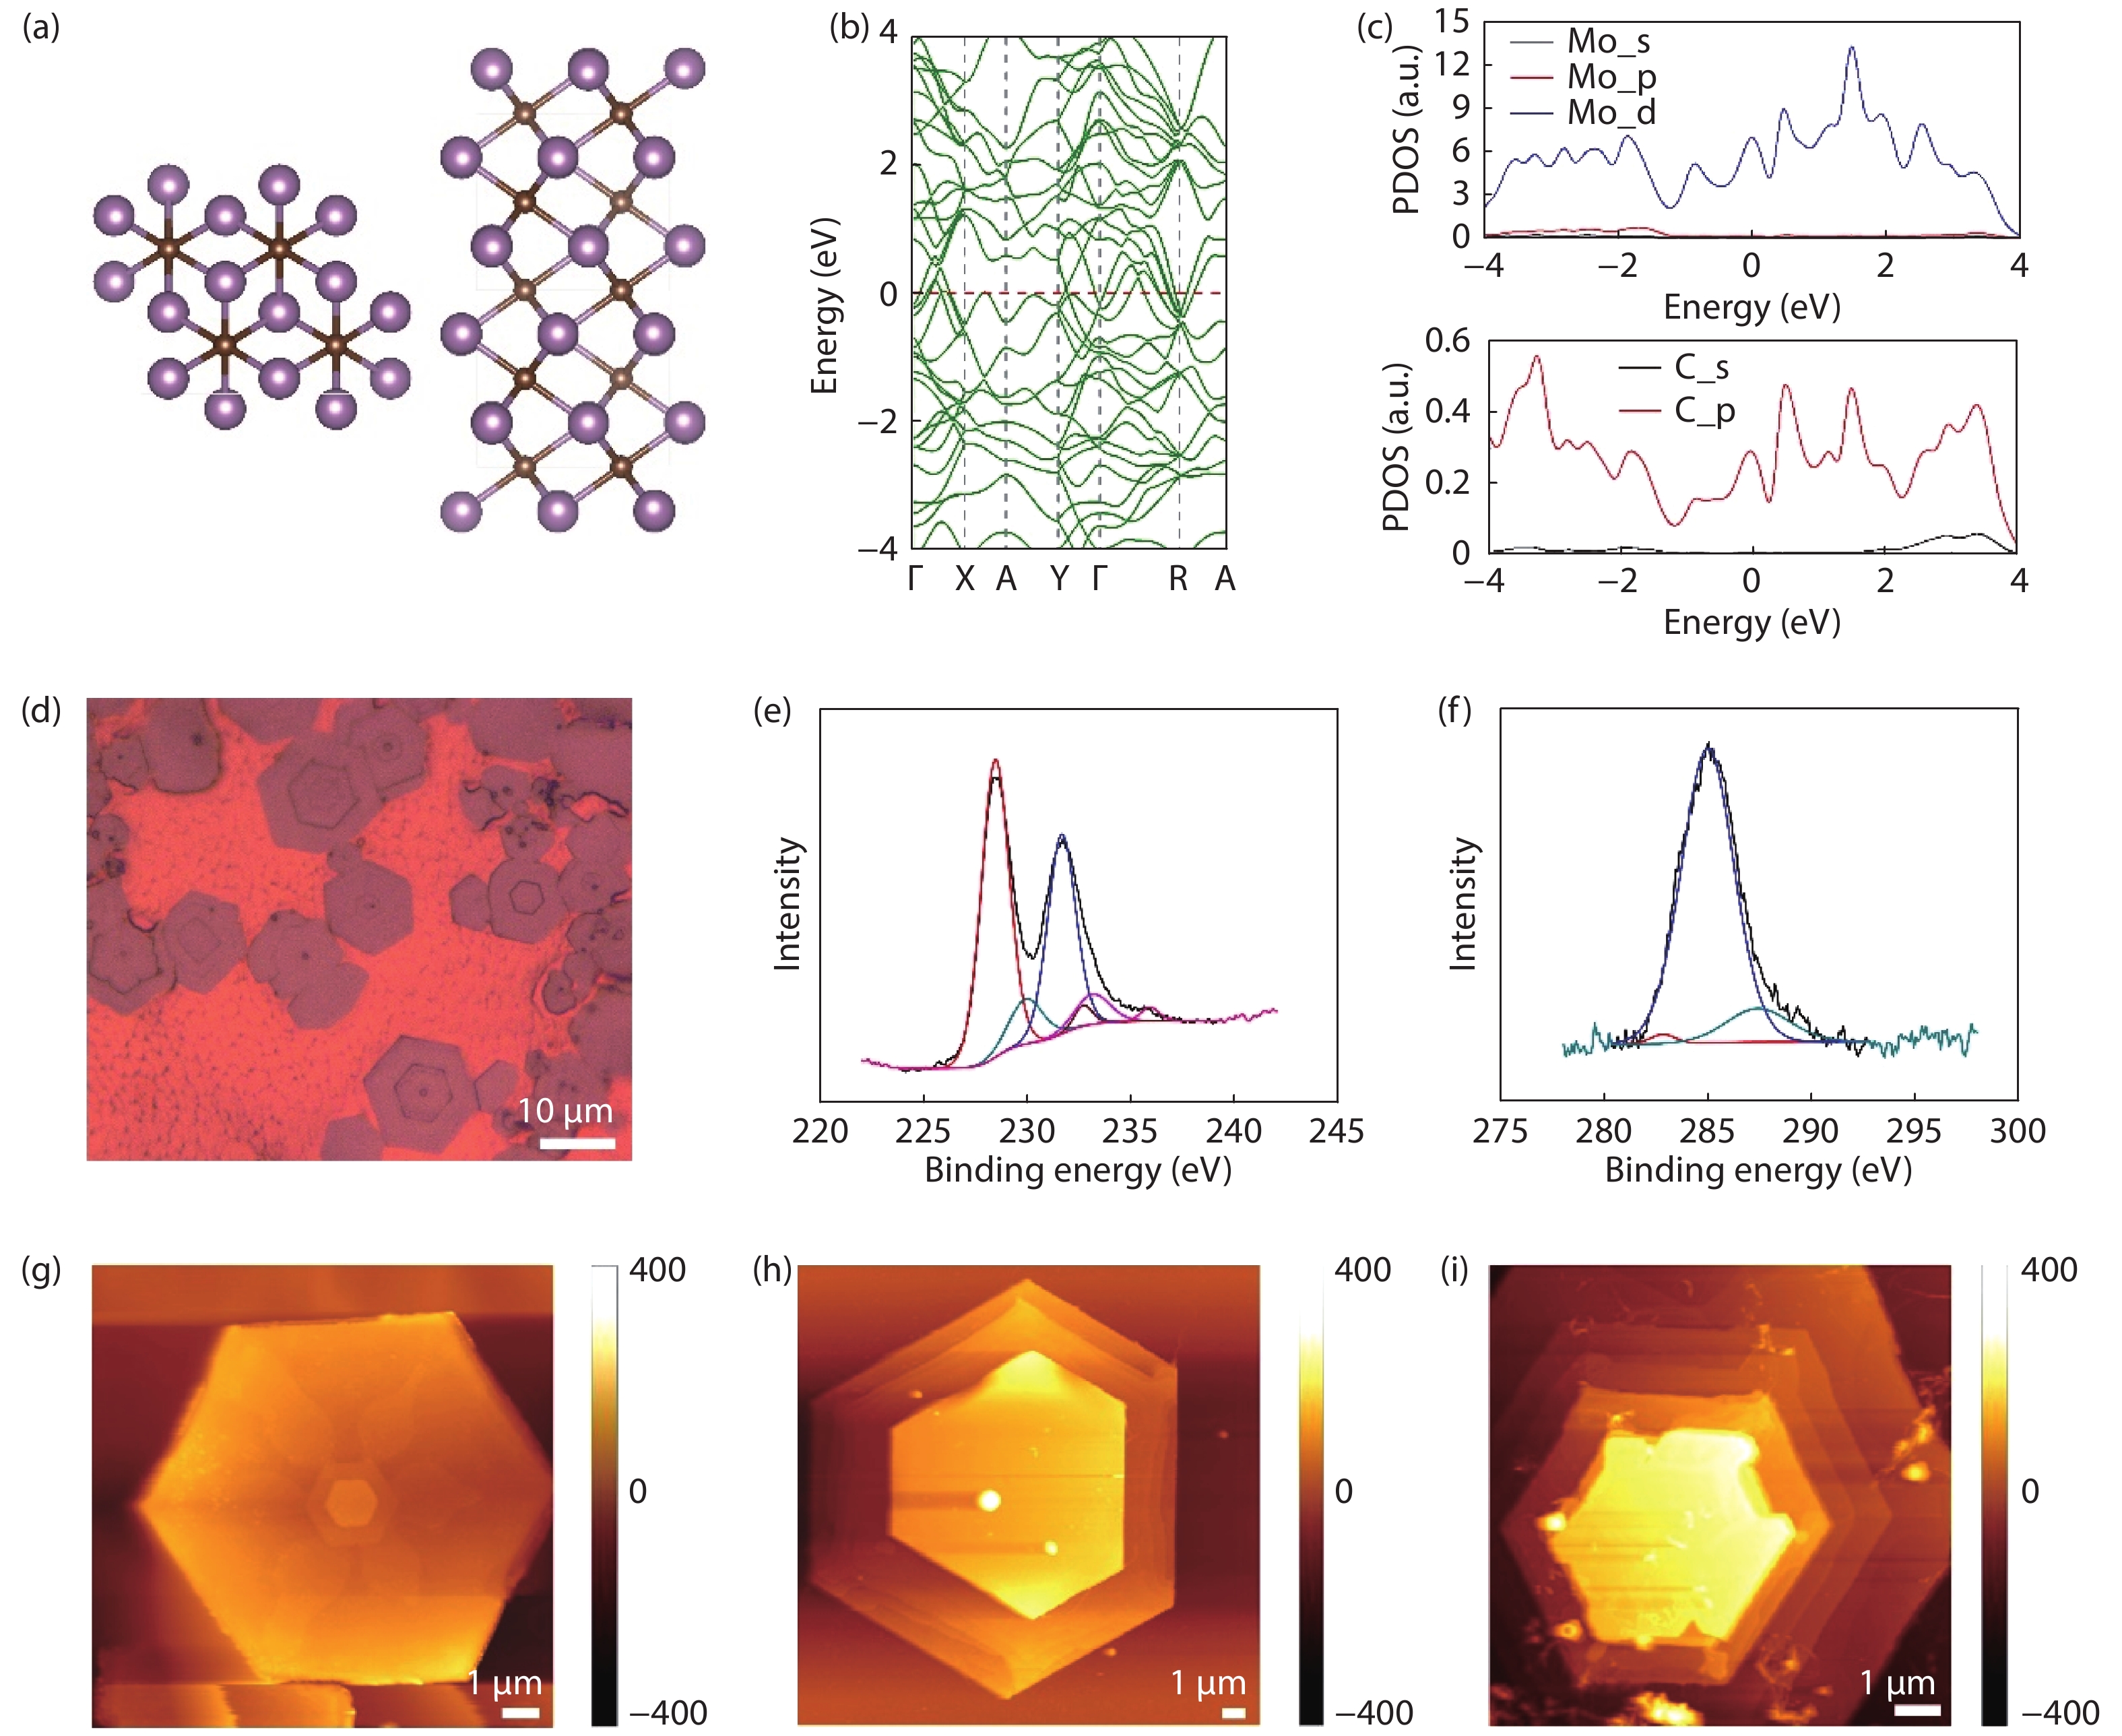 (Color online) Growth and characterization of Mo2C pyramids. (a) Crystal and (b, c) electronic structure of Mo2C from first-principles calculations. (d) Optical images of grown Mo2C pyramids structures on liquid Cu surface. (e, f) XPS spectra of Mo2C flake, indicating existence of Mo and C, respectively. (g–i), AFM images of three typical layered pyramids structures.